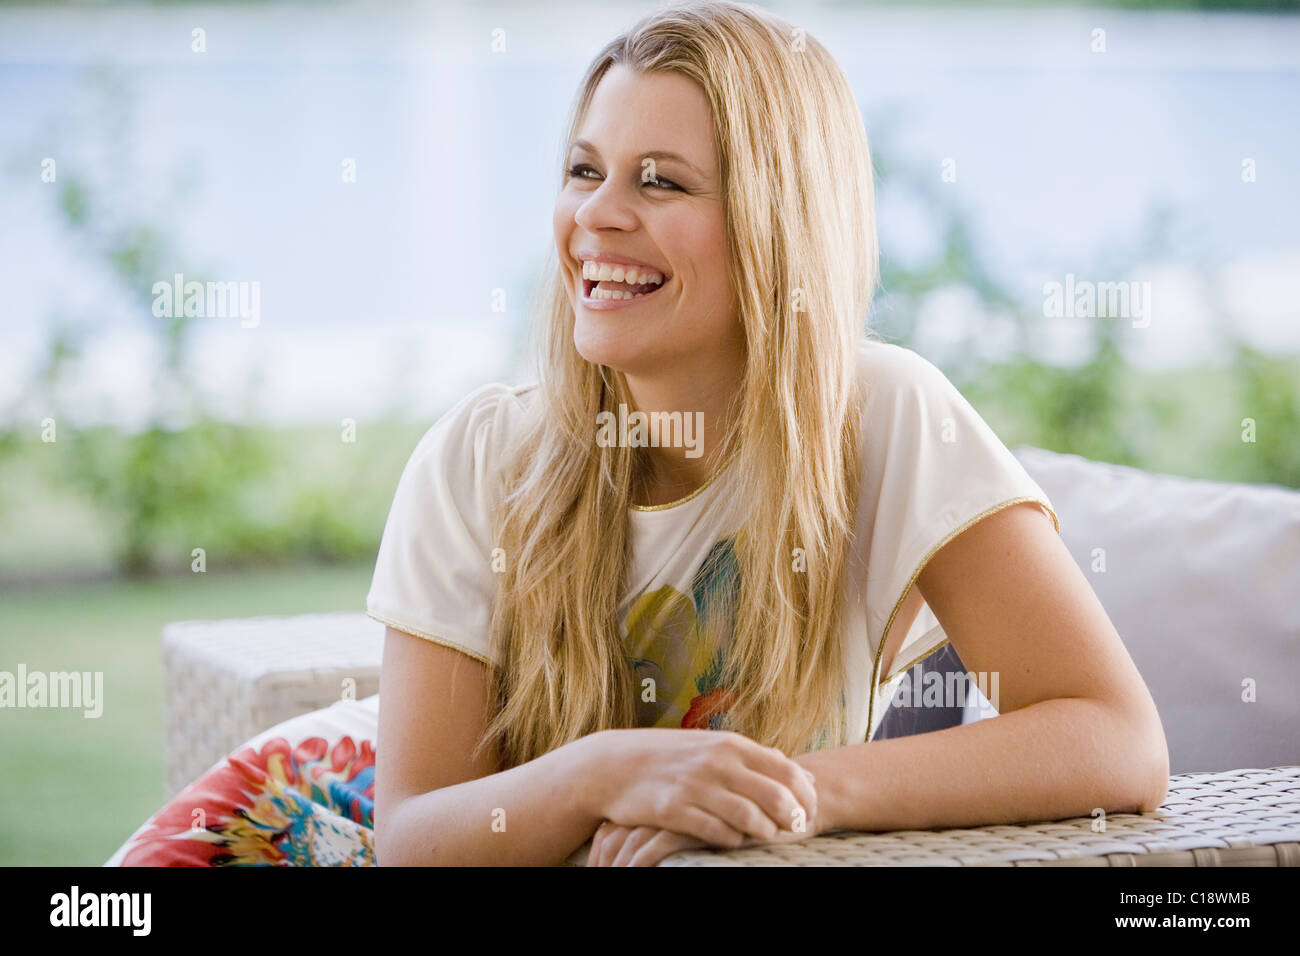 Young Beautiful woman smiling Banque D'Images